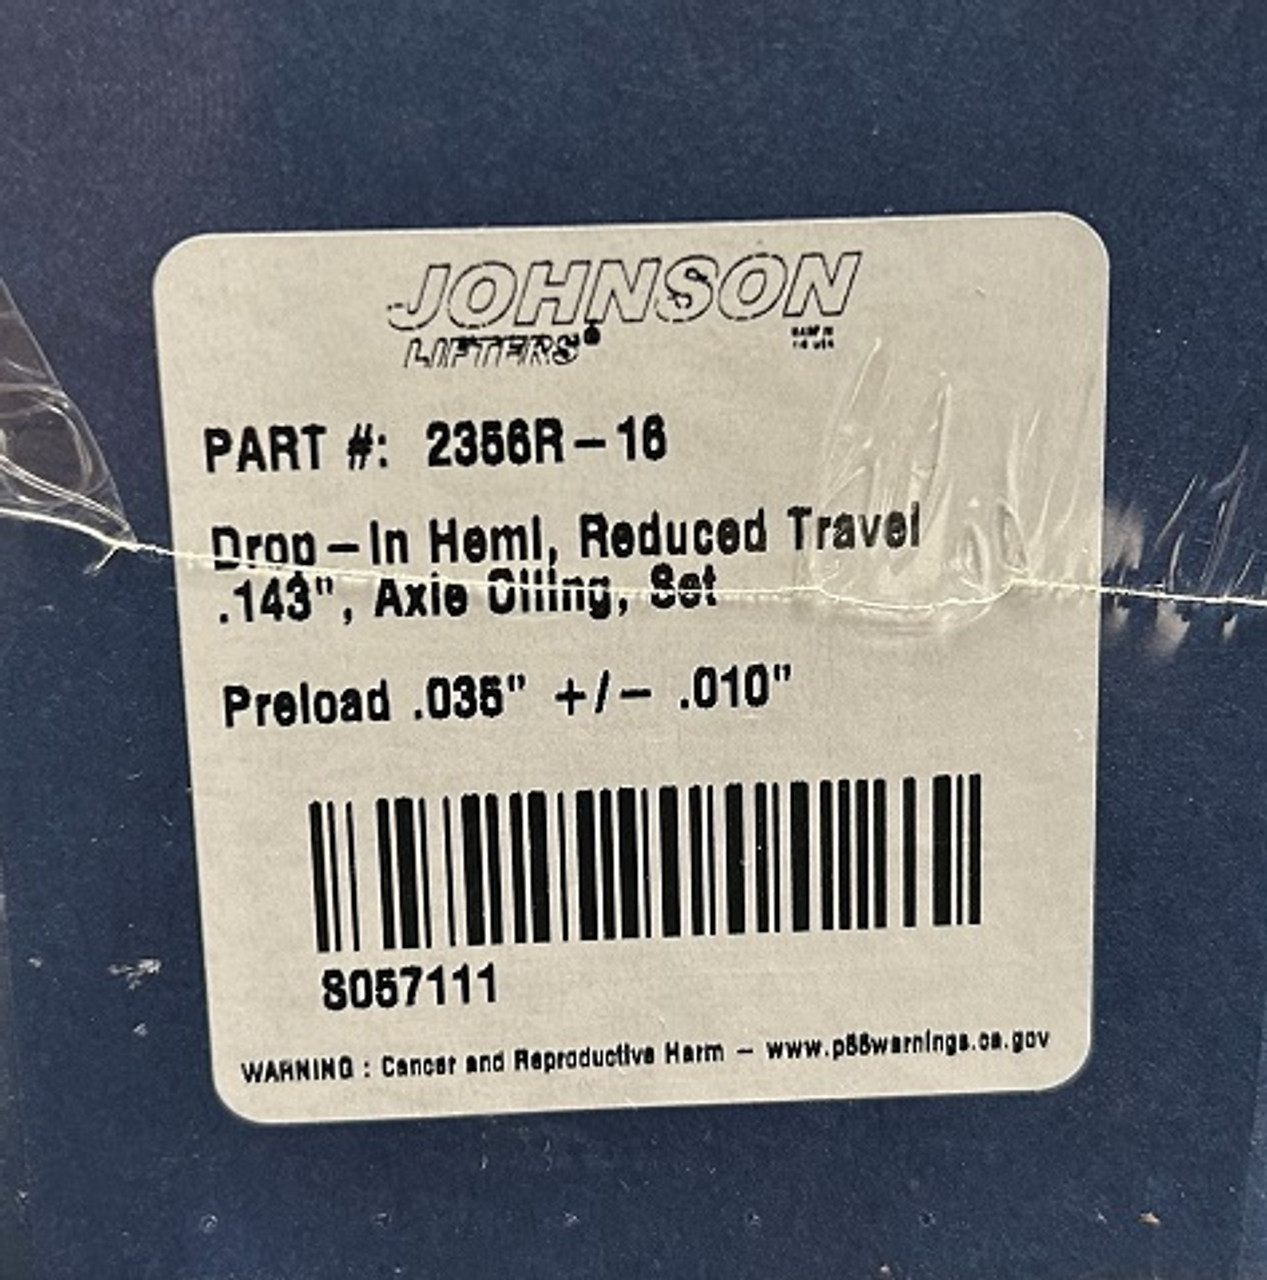 Johnson 2356R Hemi Gen3 Drop-In Lifters With Axle Oiling for 2003-newer Dodge Chrysler Jeep Hemi Engines 2356 non-MDS Lifter 5.7L 6.1L 6.2L 6.4L